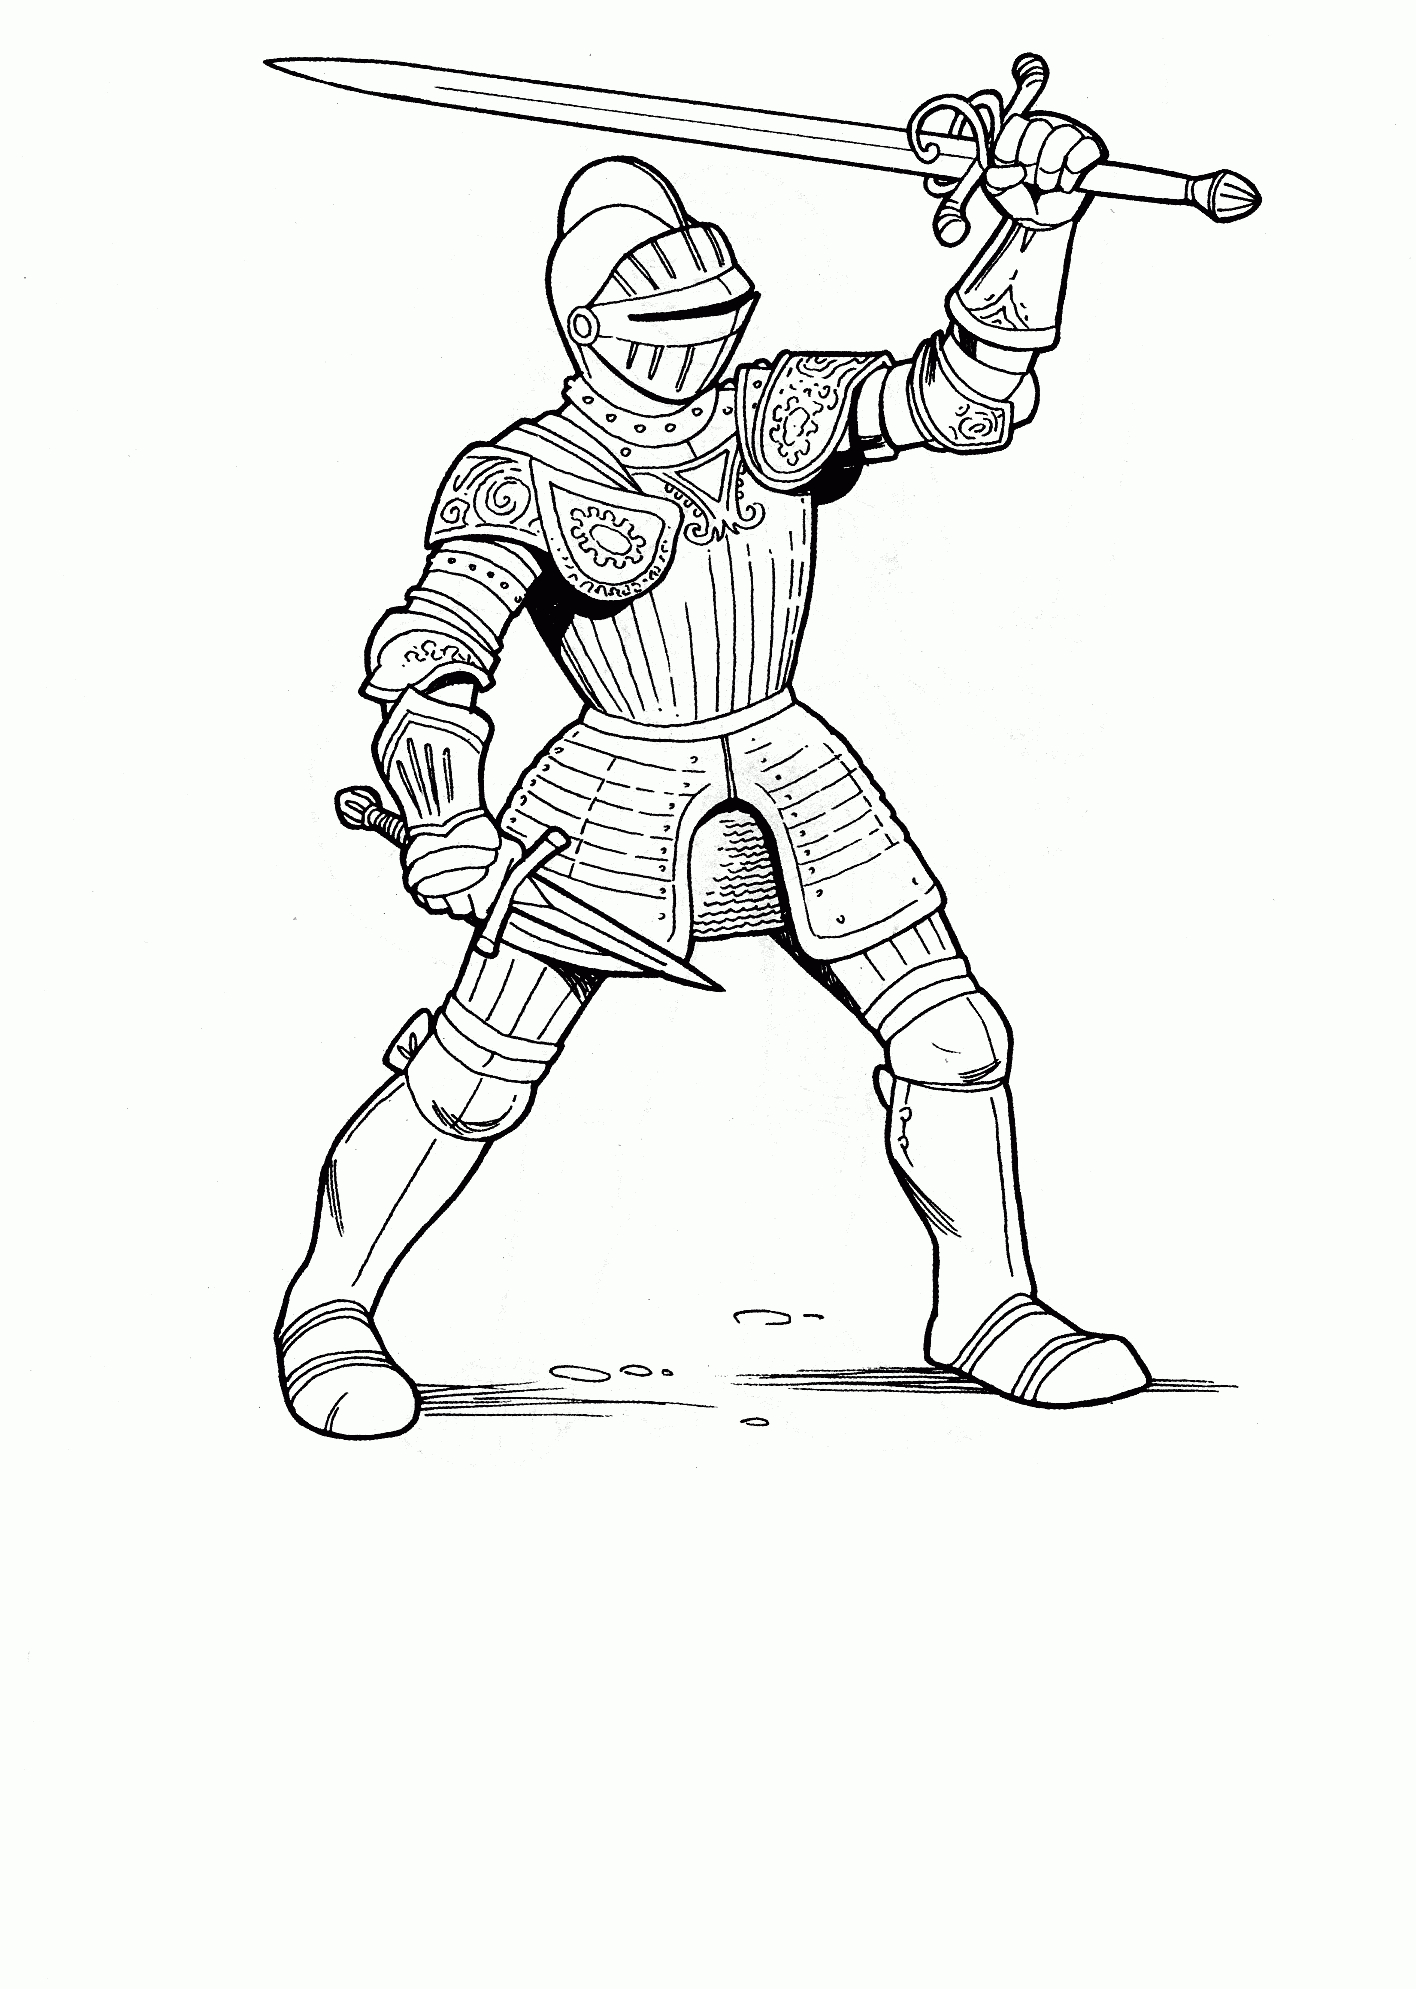 Knight Coloring Sheets 01 | Coloring | Coloring Pages, Color - Free Printable Pictures Of Knights